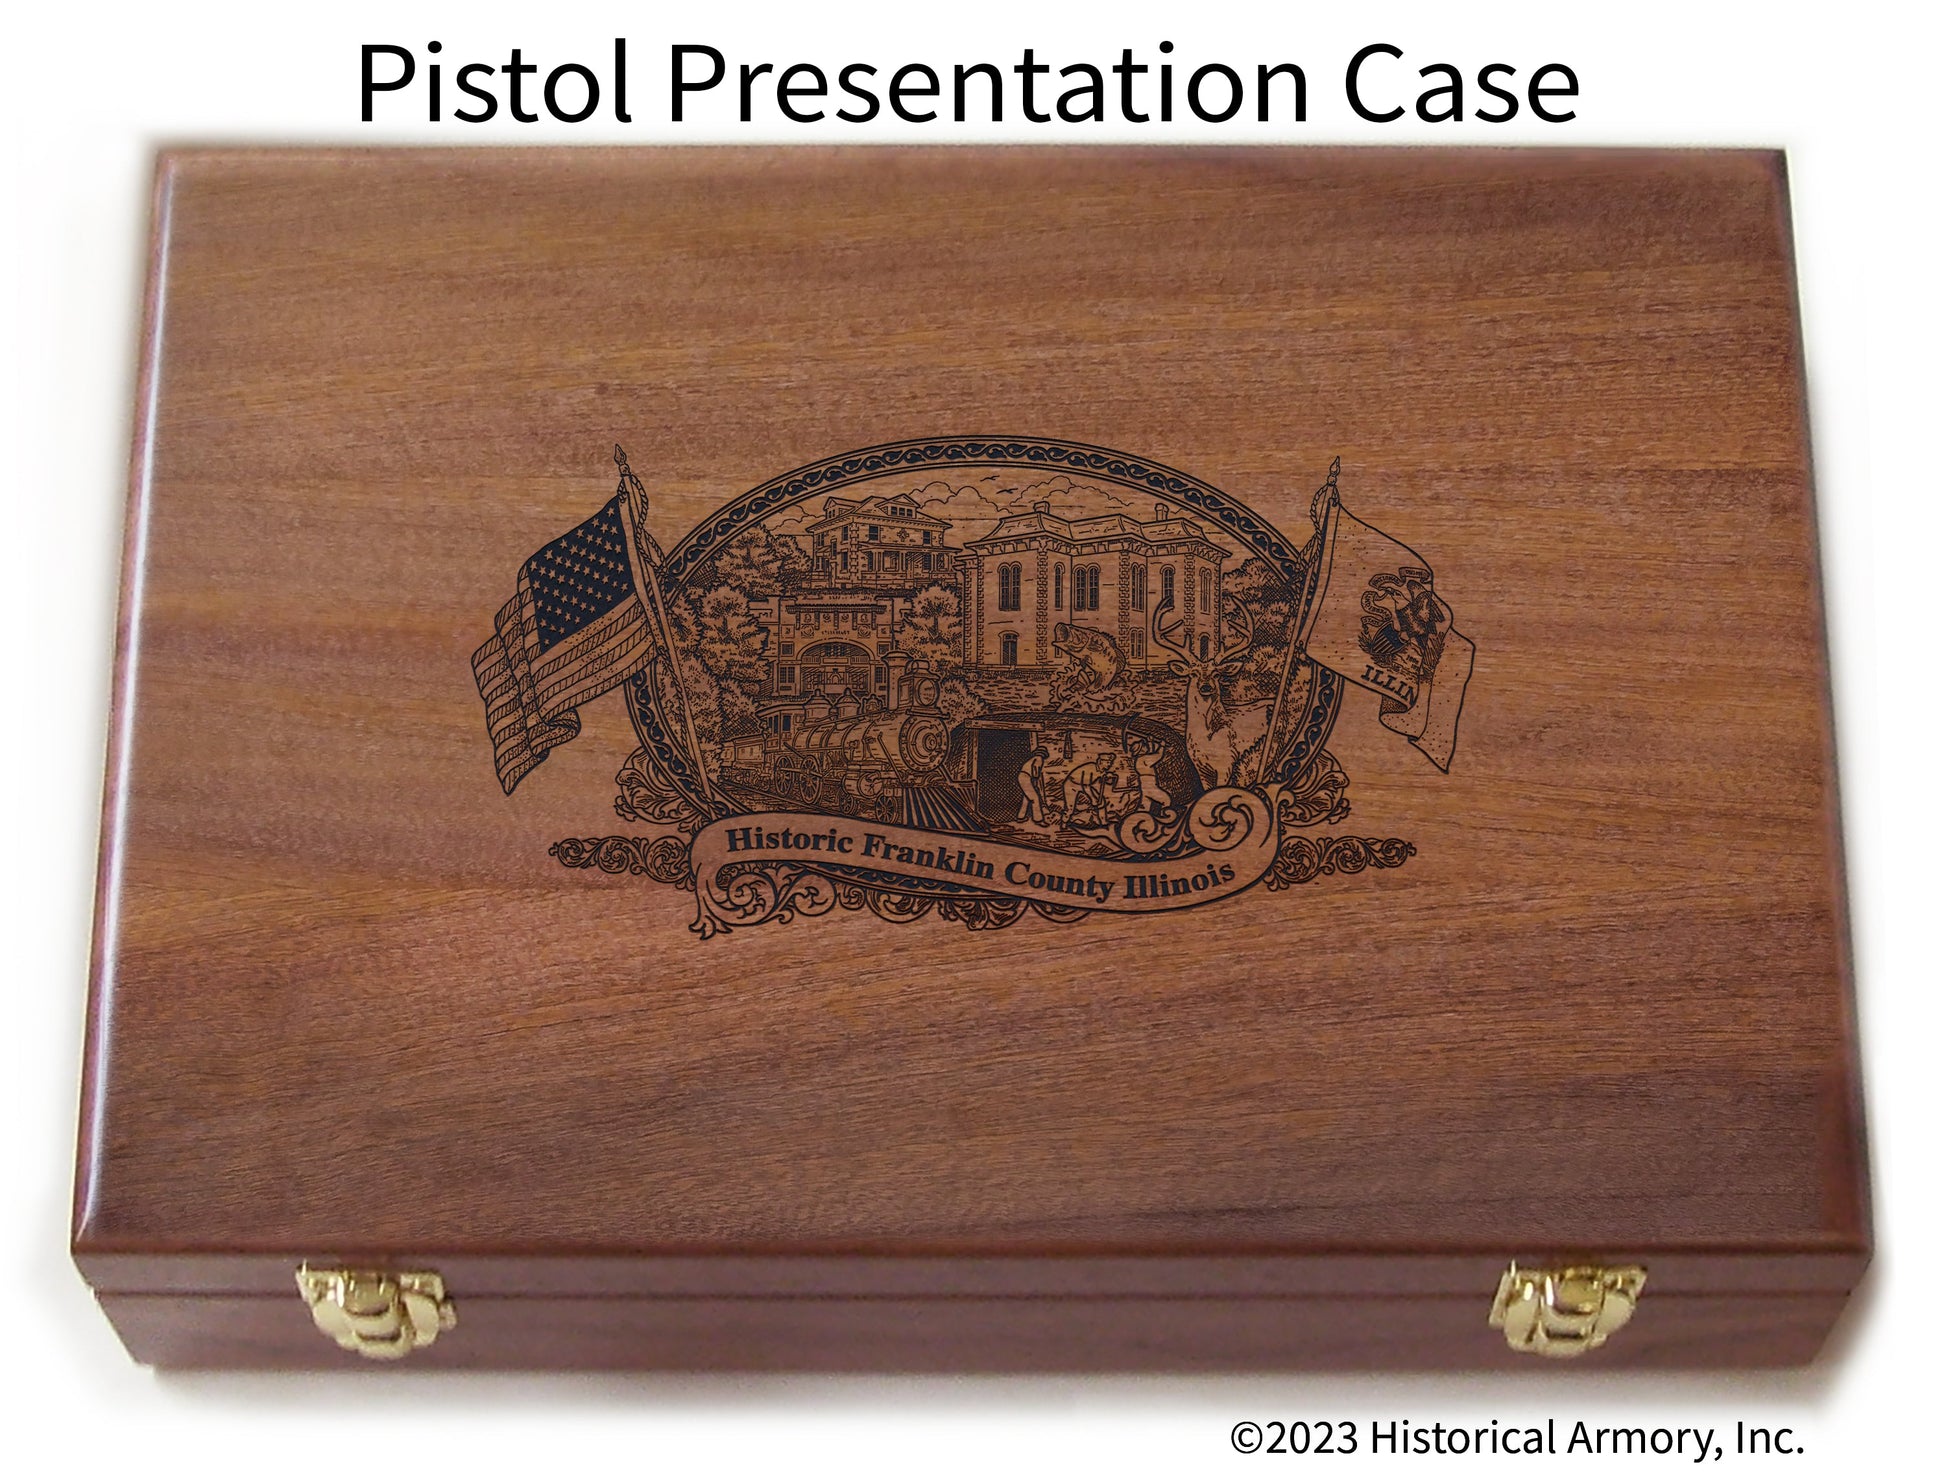 Franklin County Illinois Engraved .45 Auto Ruger 1911 Presentation Case